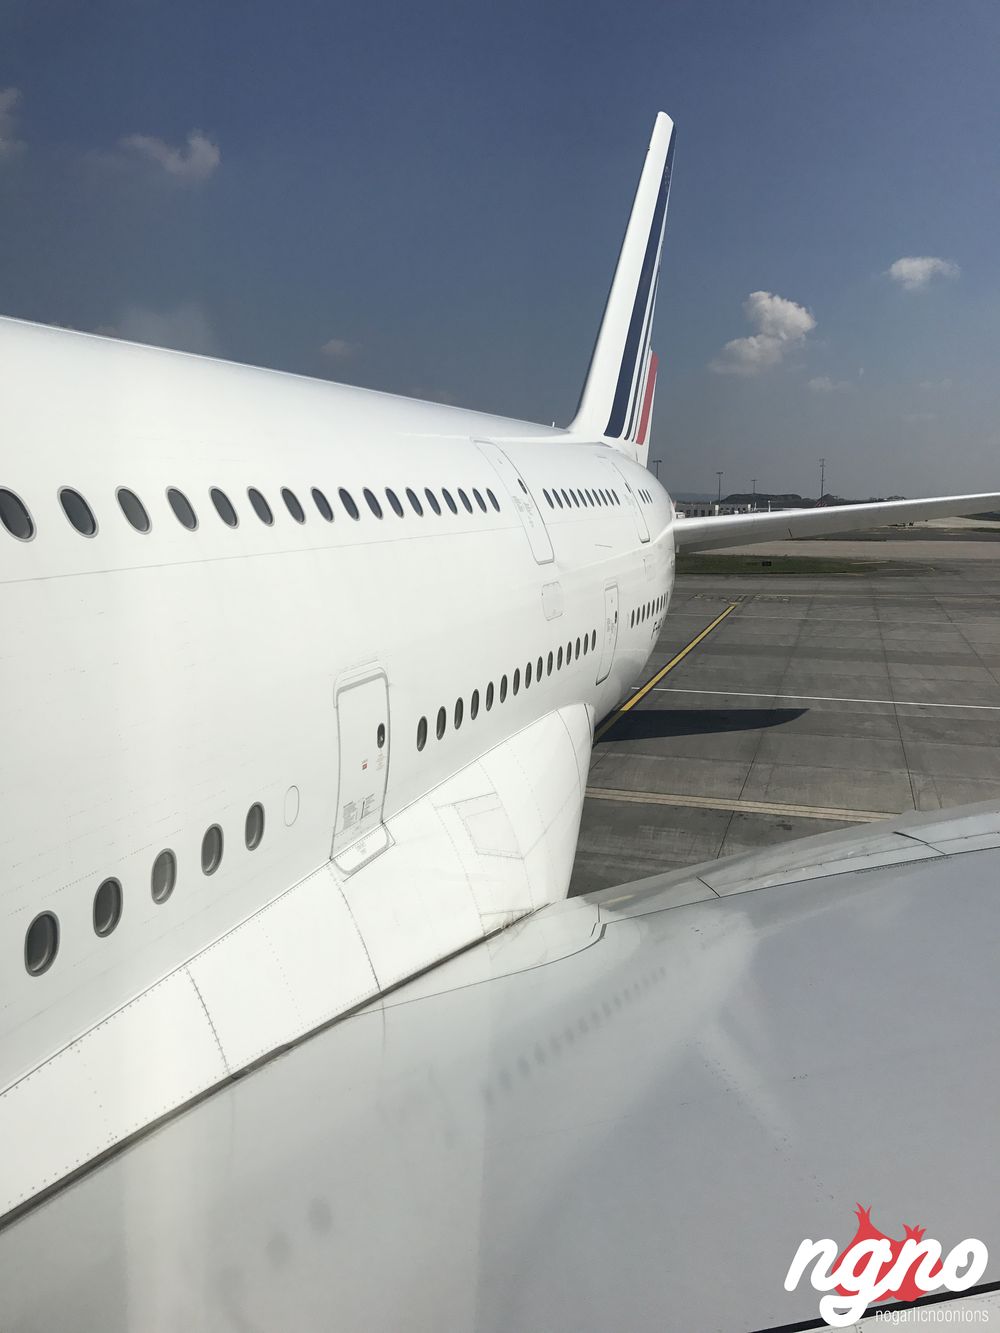 airfrance-airbus-a380-plane-business-class442017-04-06-08-38-36